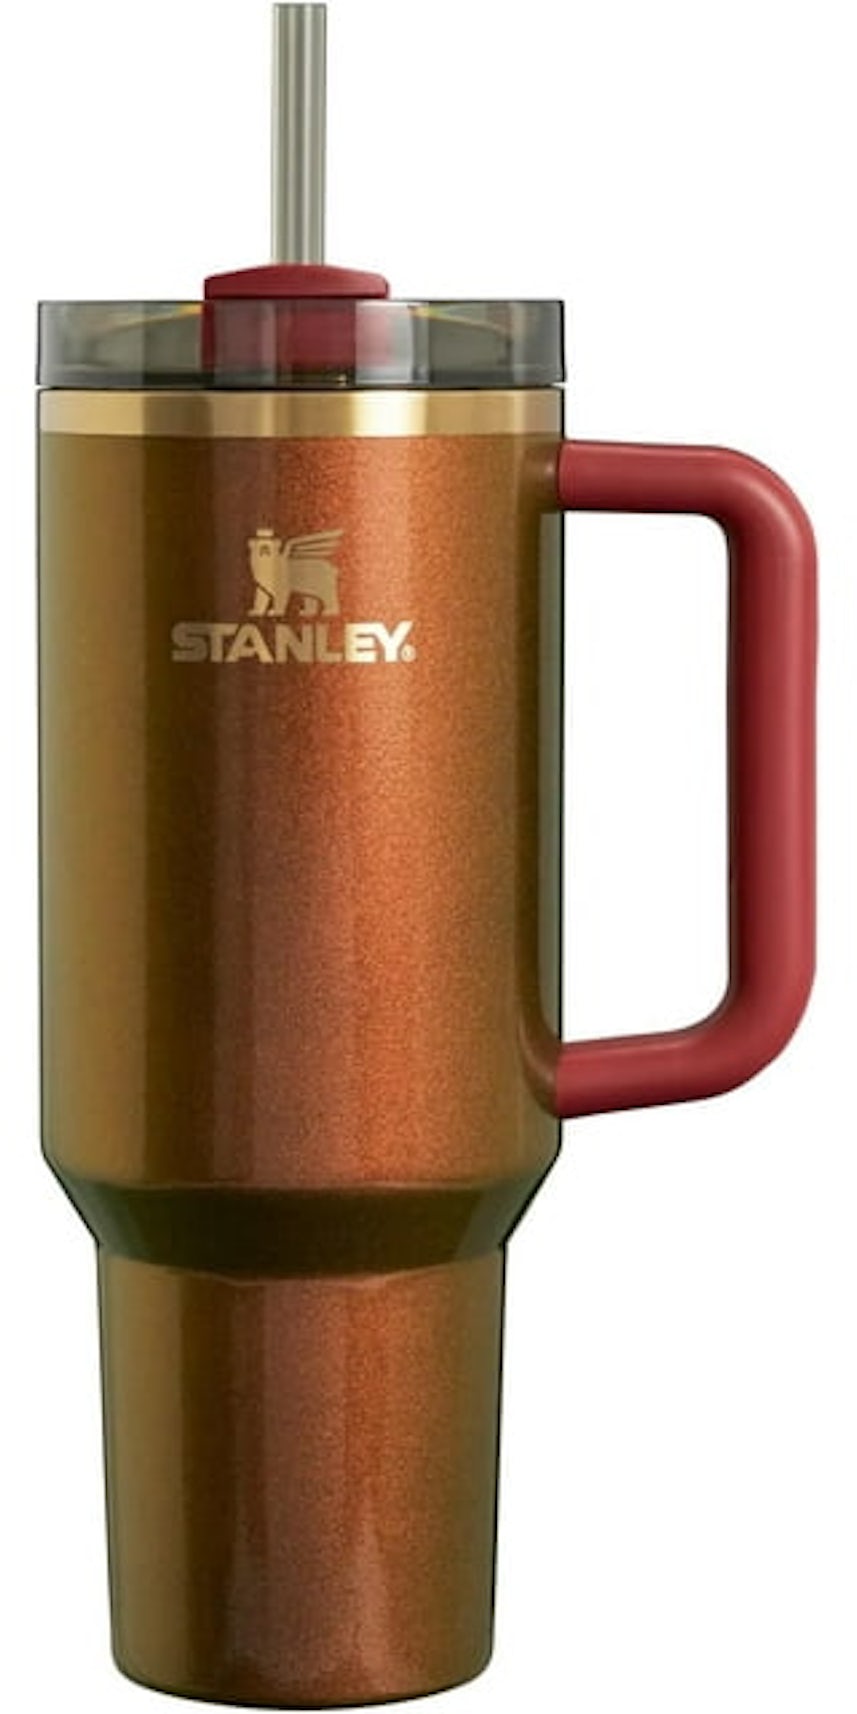 Looking for a limited edition Stanley tumbler? All 5 are still in